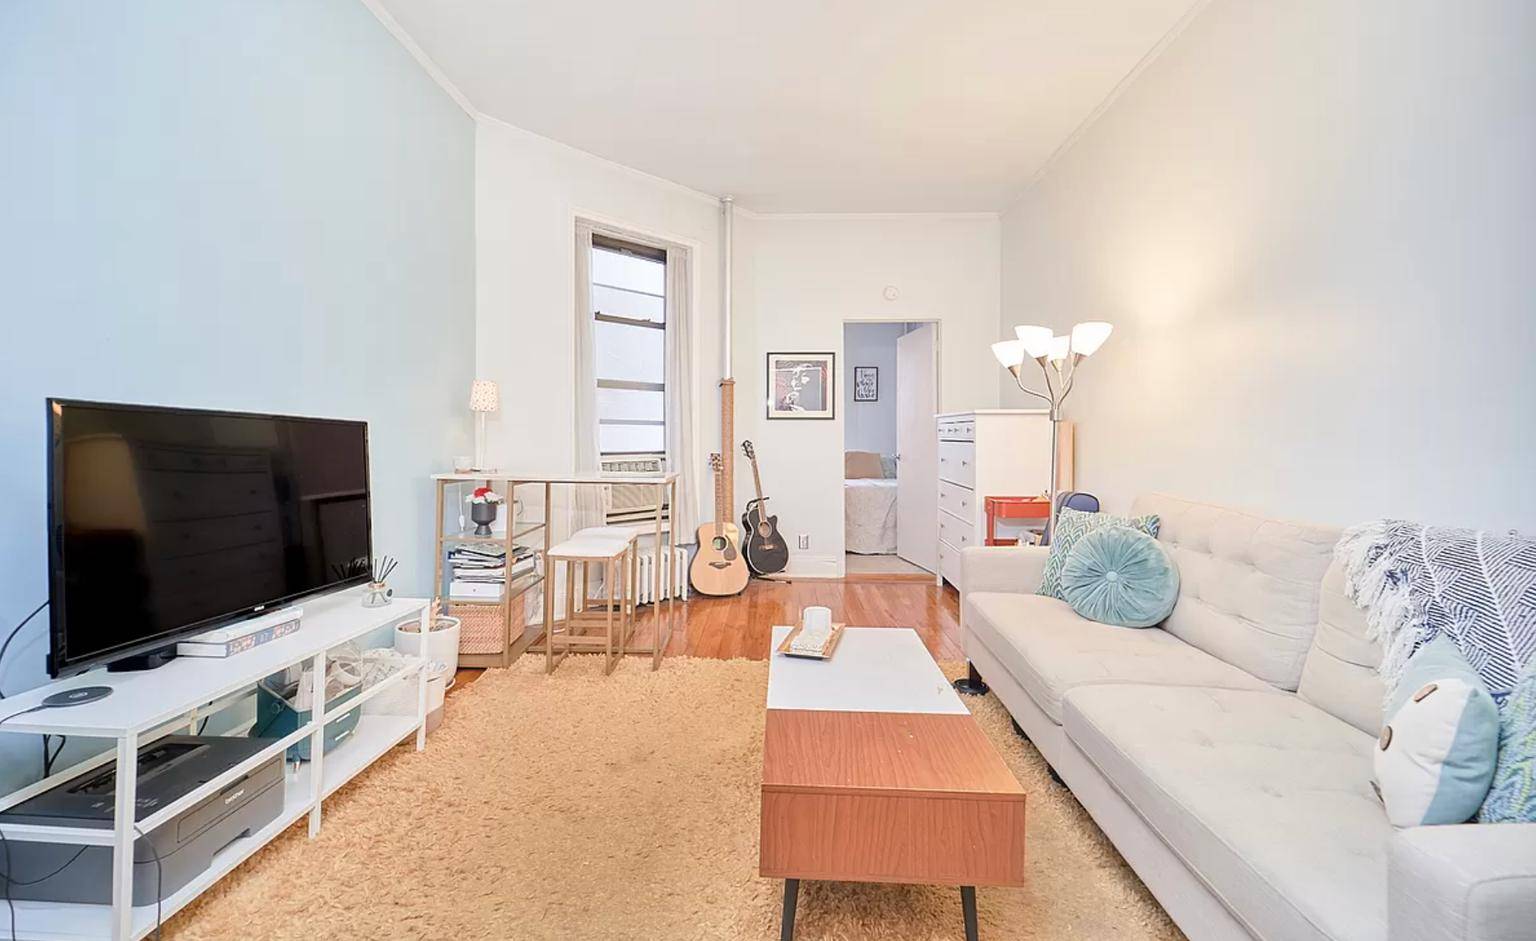 APARTMENT FEATURES DishwasherWalk through Kitchen with lots of cabinets and countertop spaceLarge ClosetTiled bathroom with tub showerHardwood FloorsHeat Hot water includedBuilding Neighborhood Laundry in BuildingResponsive ManagementSteps away to all tra